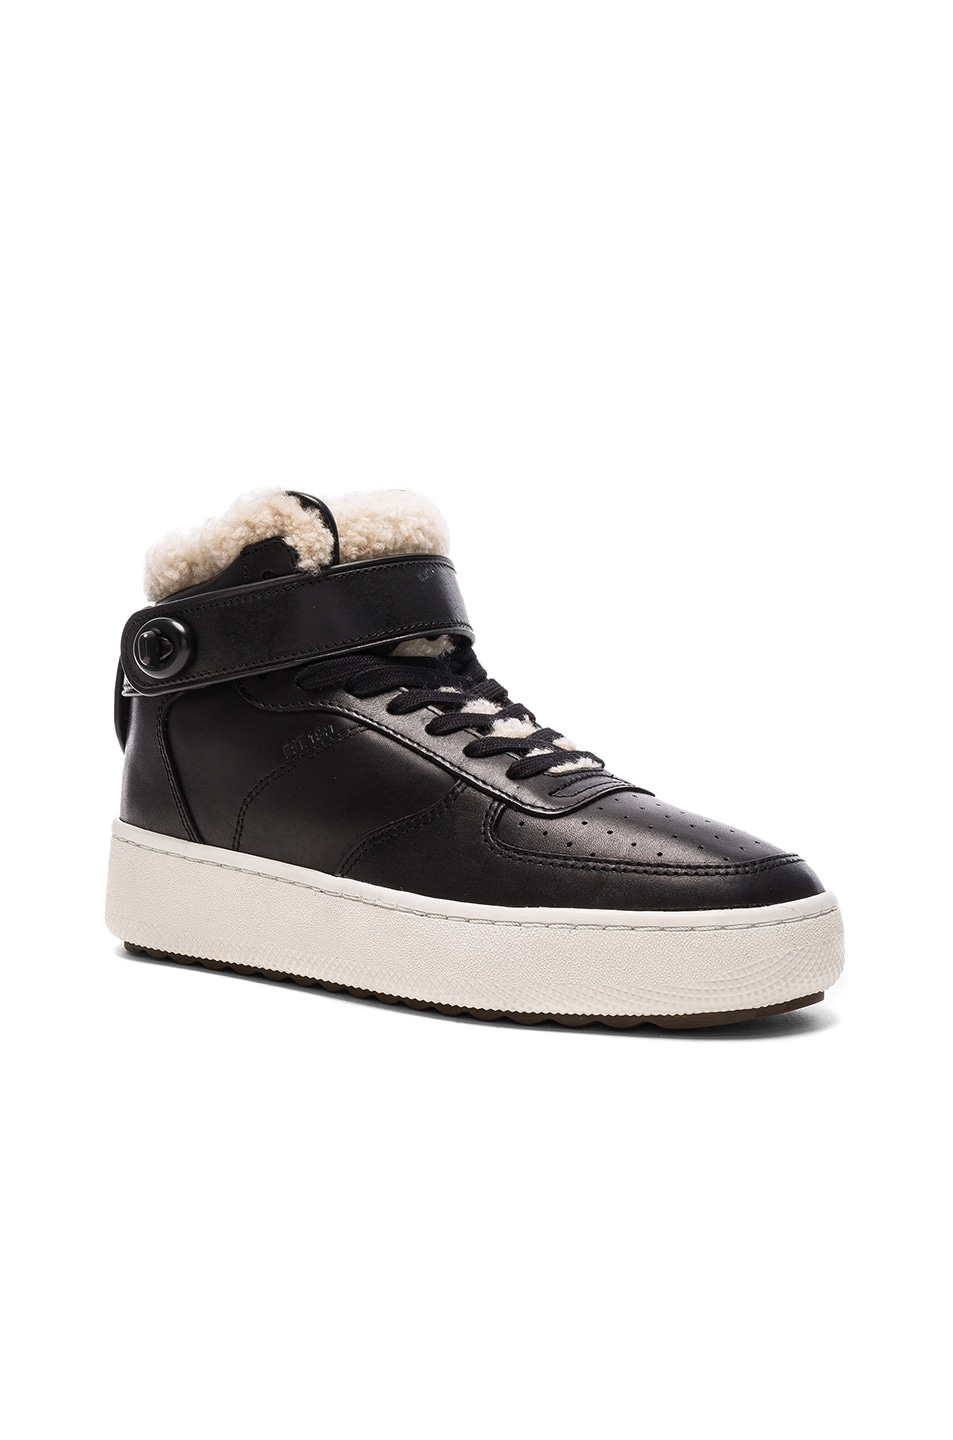 Image 1 of Coach Shearling Turnlock Leather Sneakers in Black